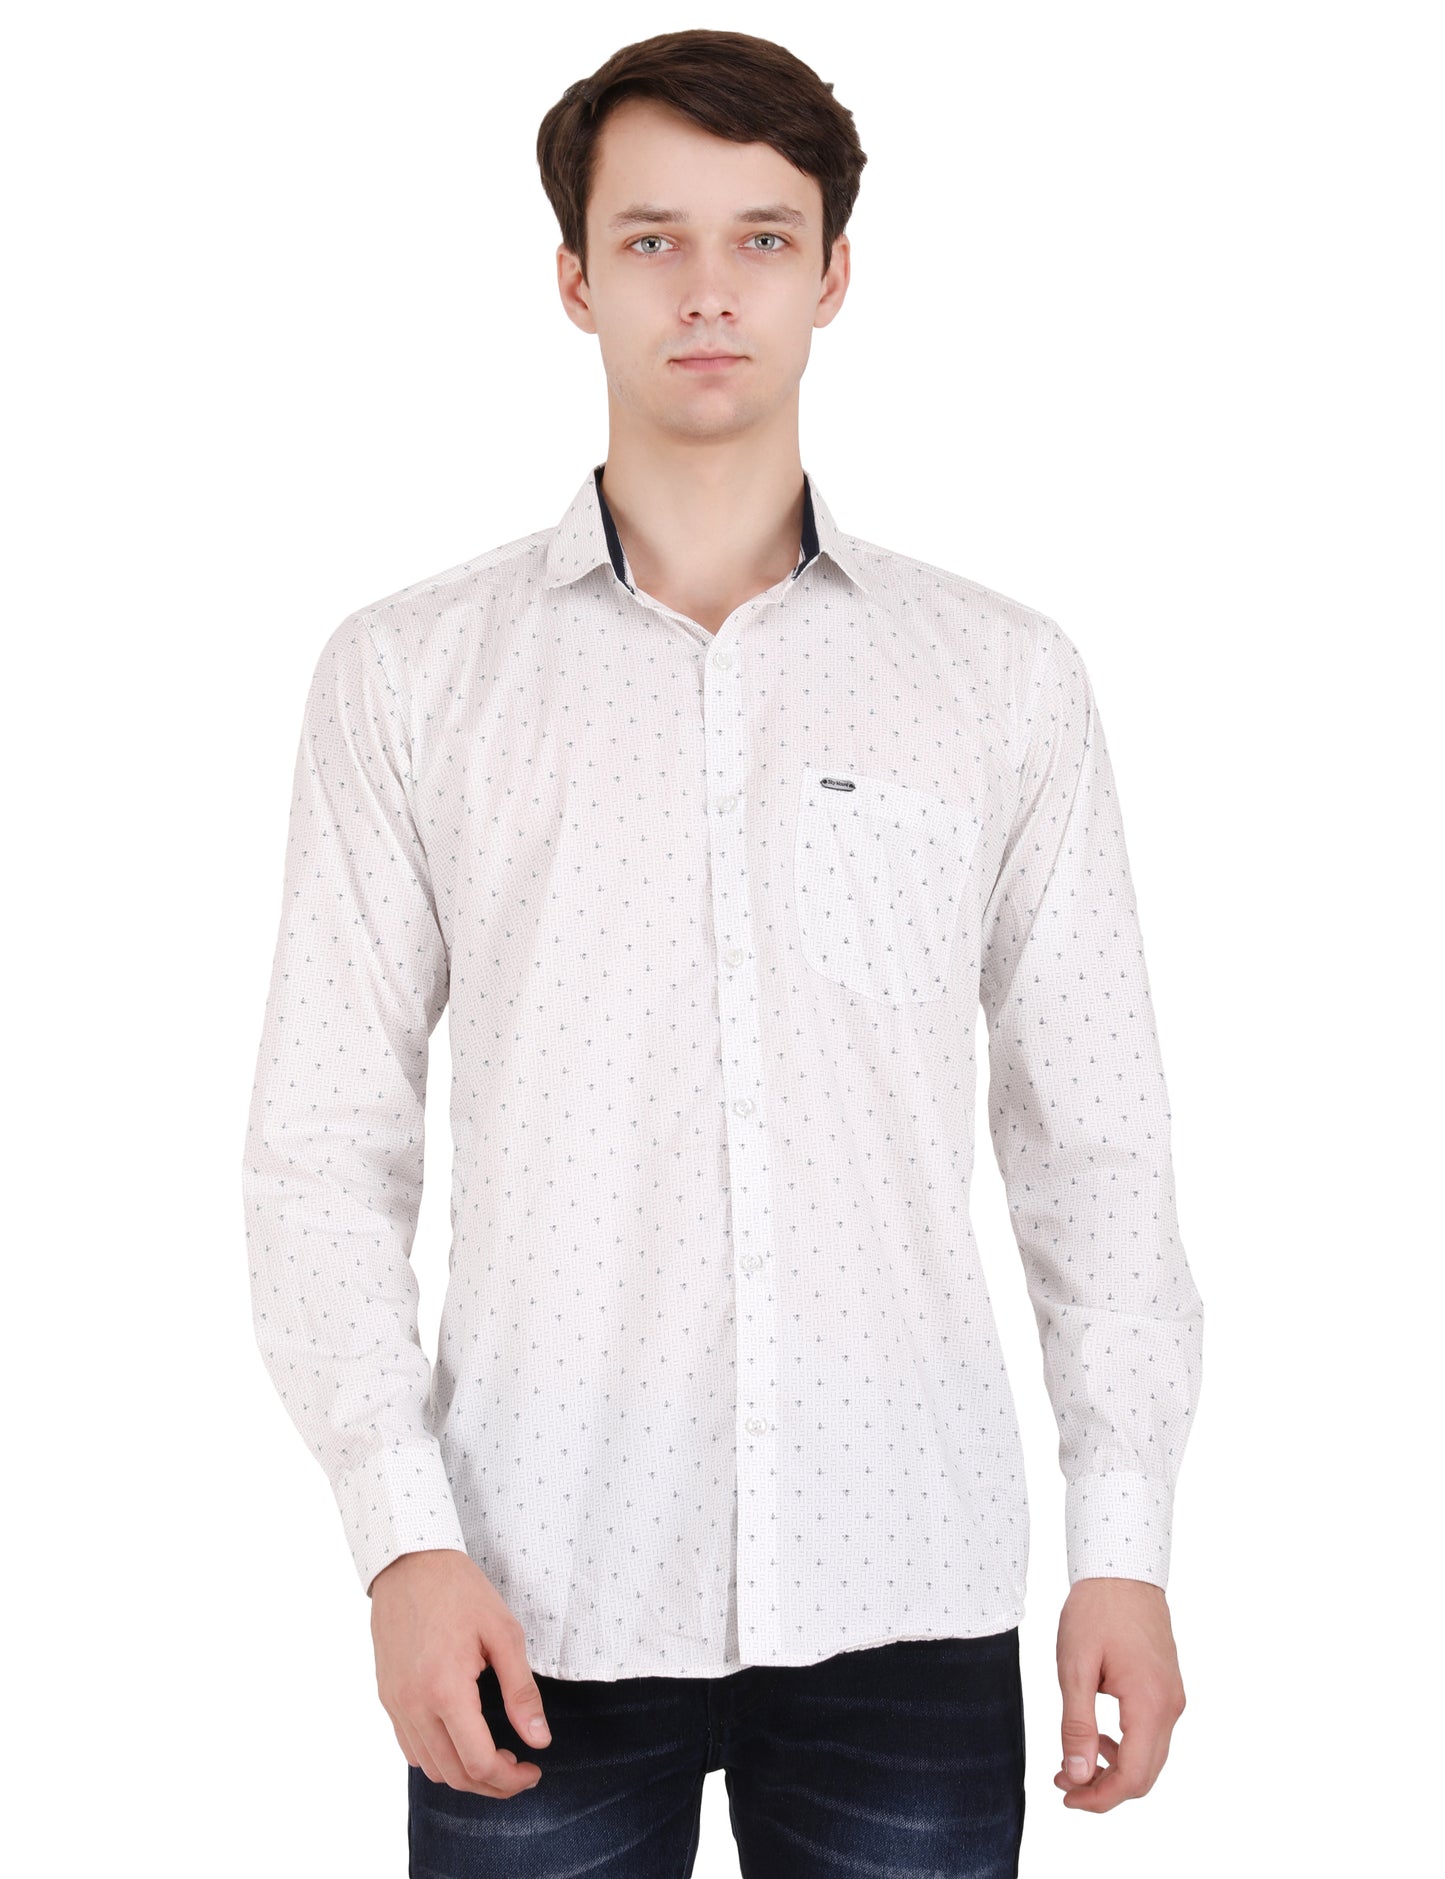 Classic Printed White Shirt for Timeless Style | Shop Men's Fashion Online